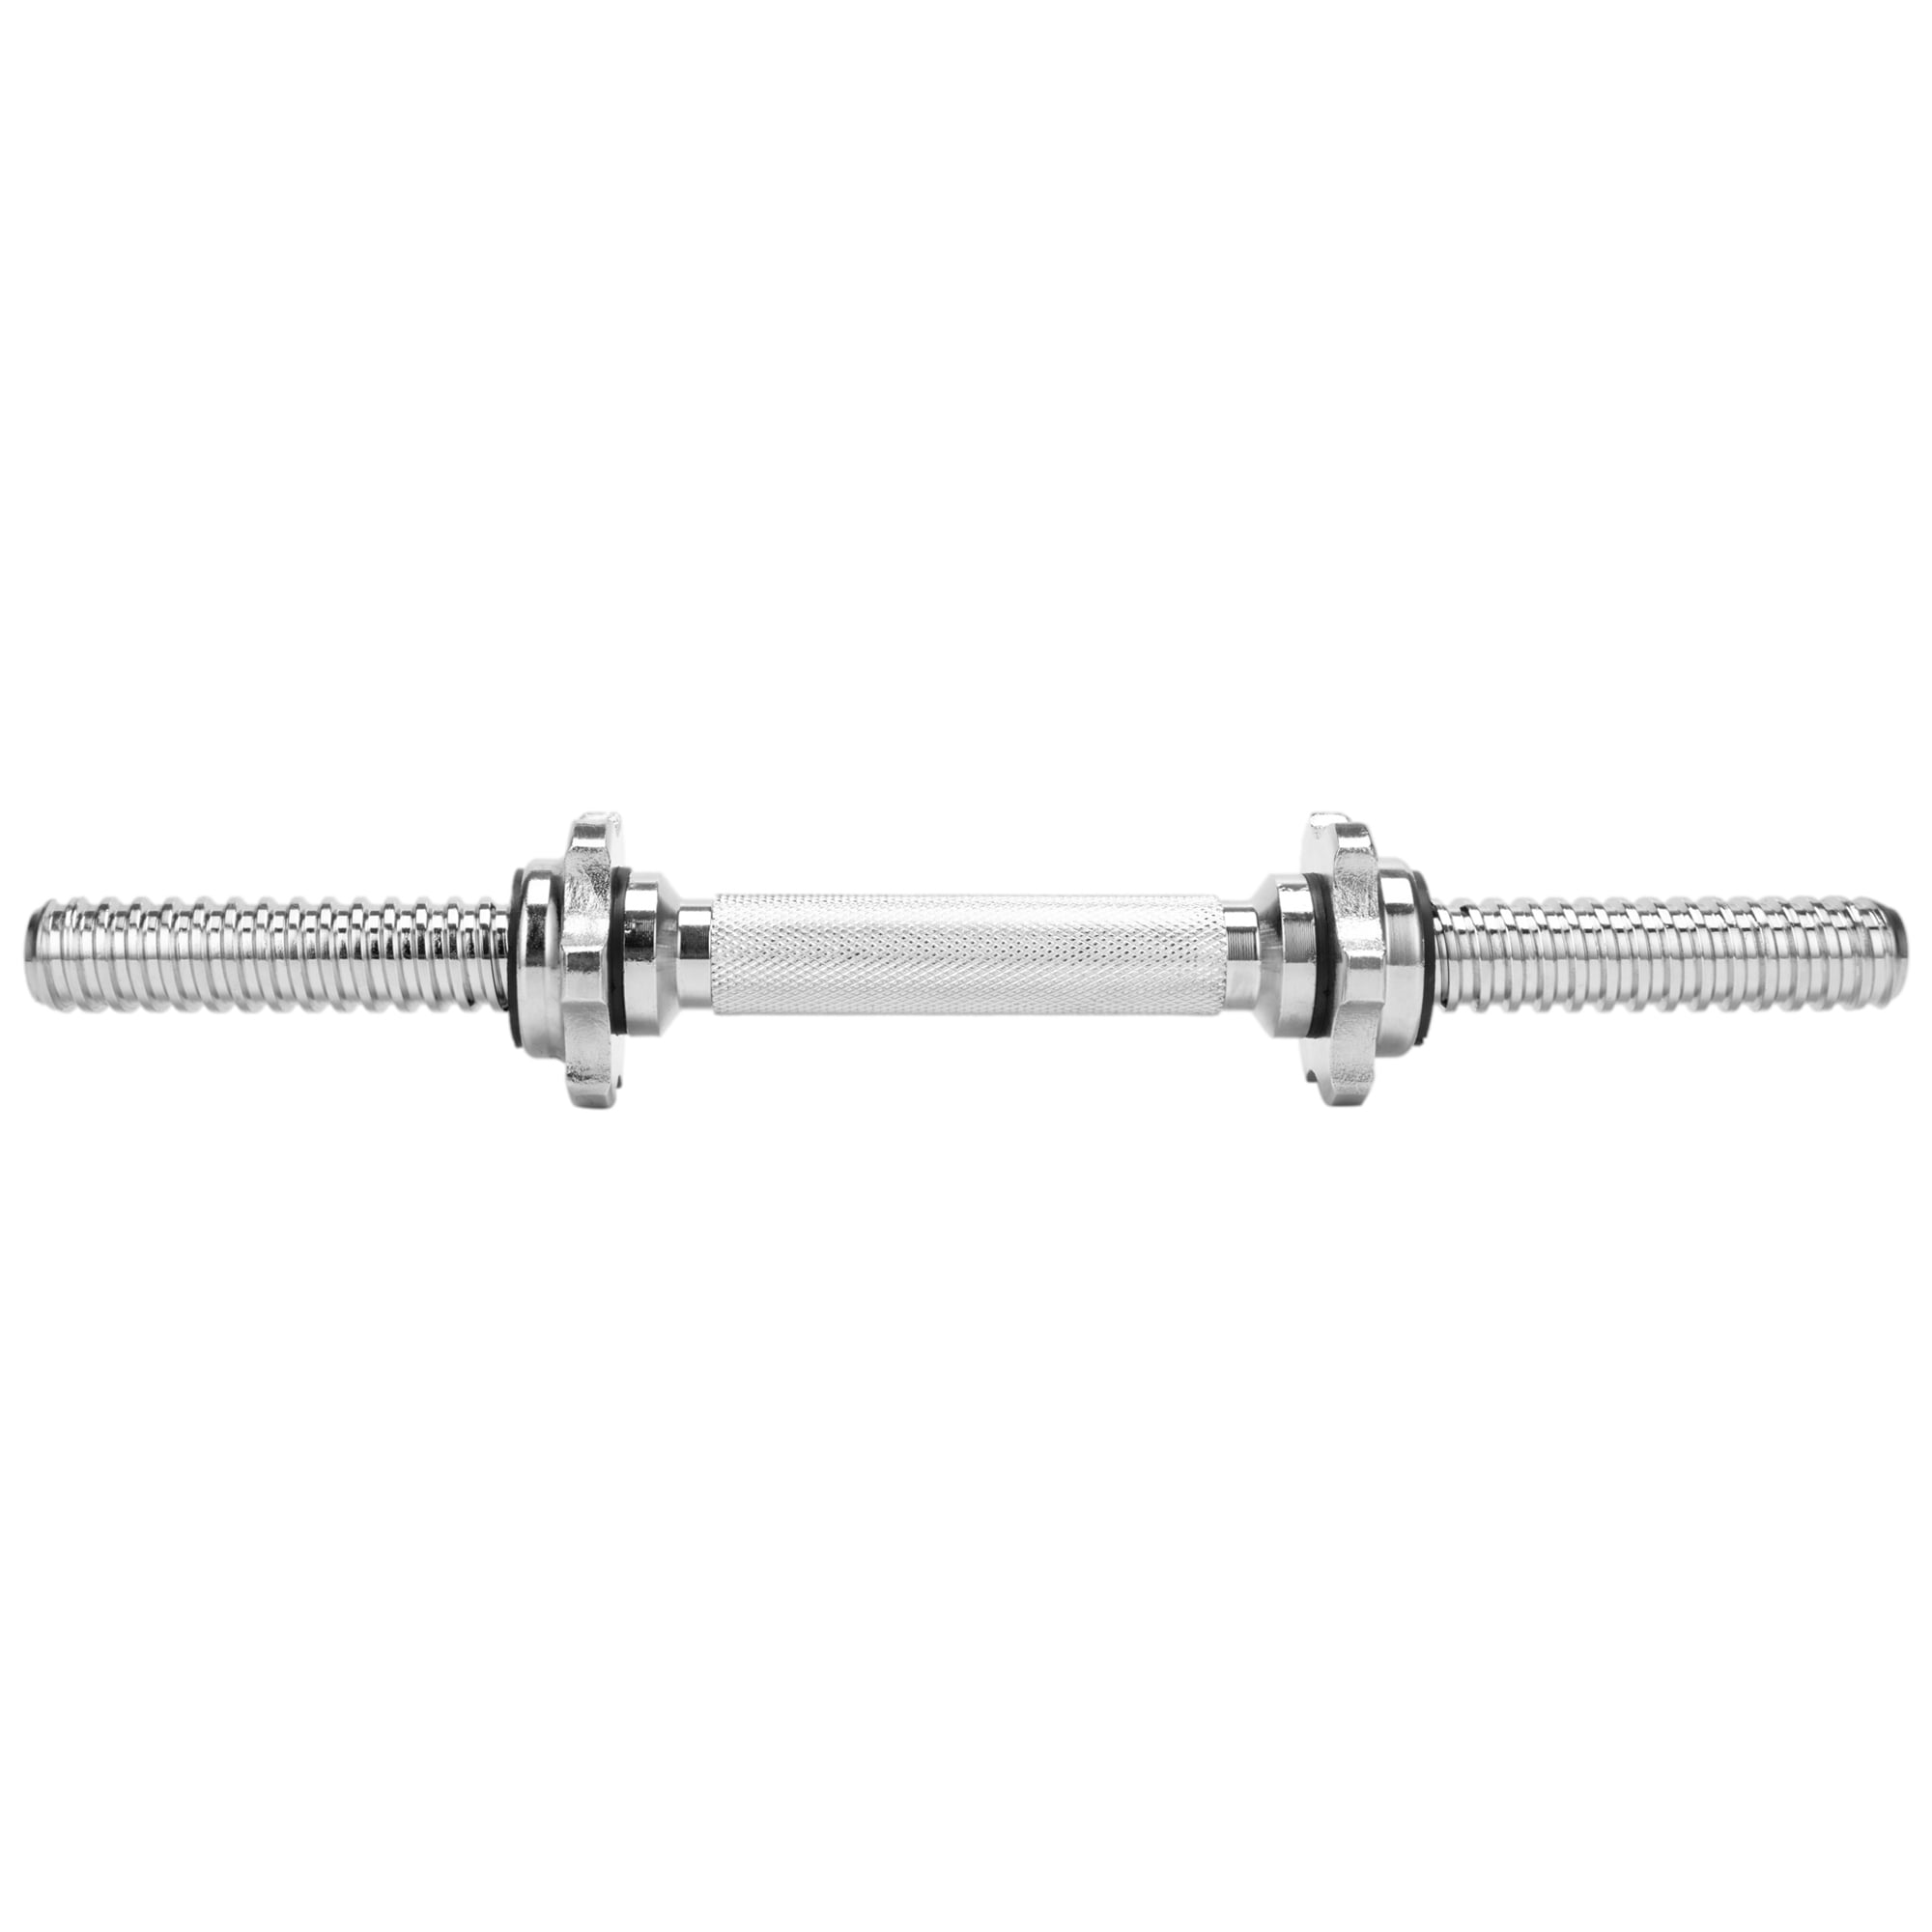 Details about   2pcs 15.7 Dumbbell Bar Threaded Adjustable Dumbbell Handles Fitness w/ Collars 